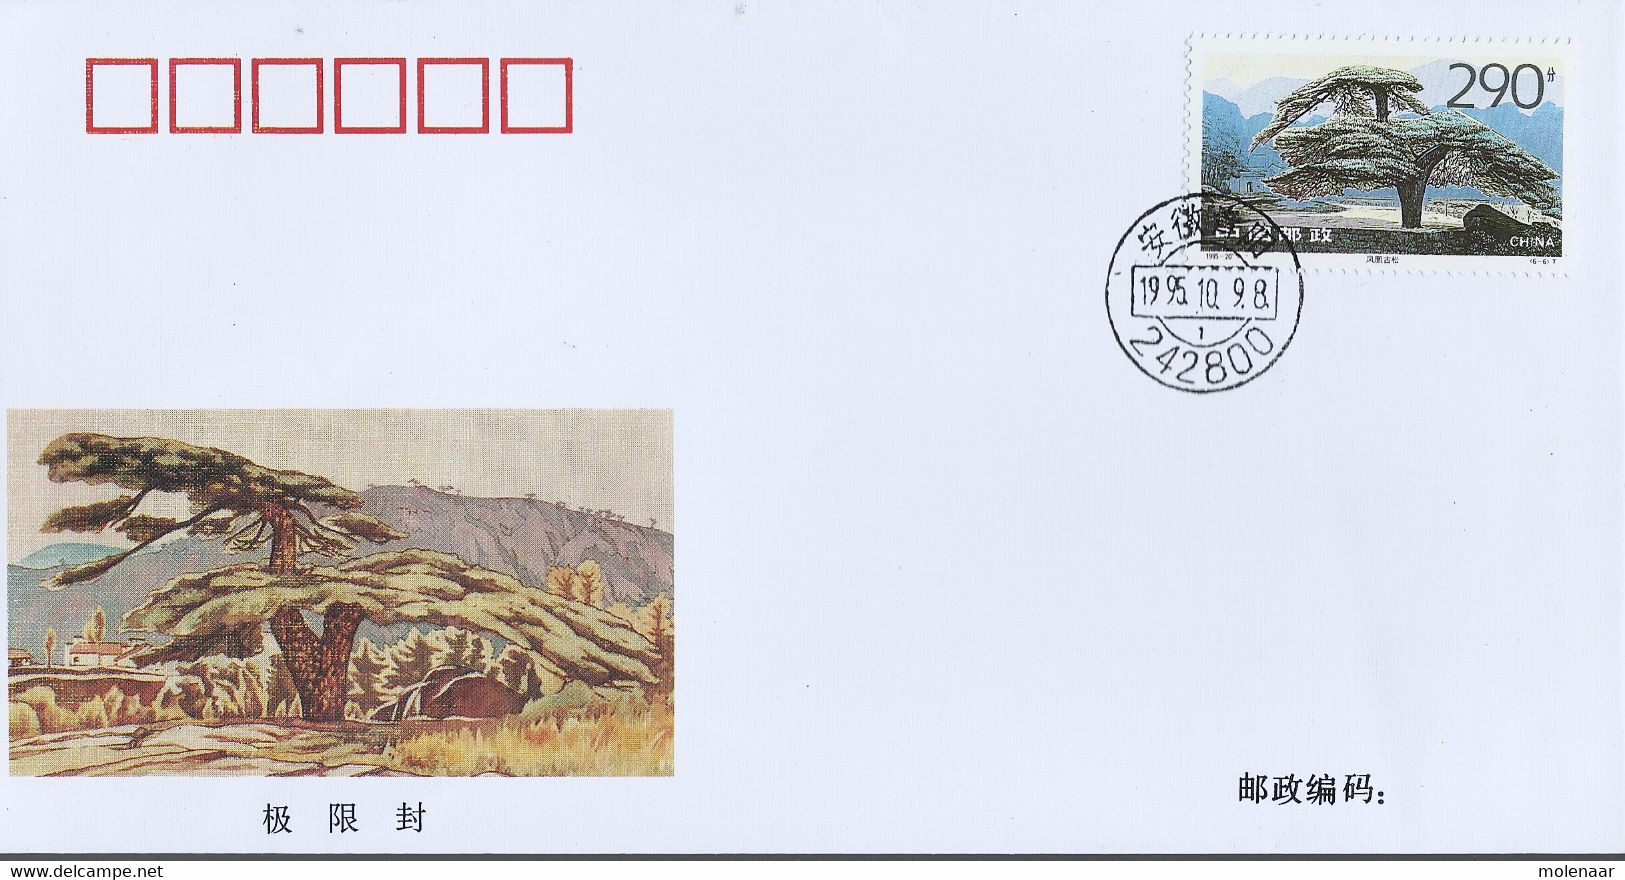 China Volksrepubliek FDC 1995-20 PJF-5 6 covers (464)